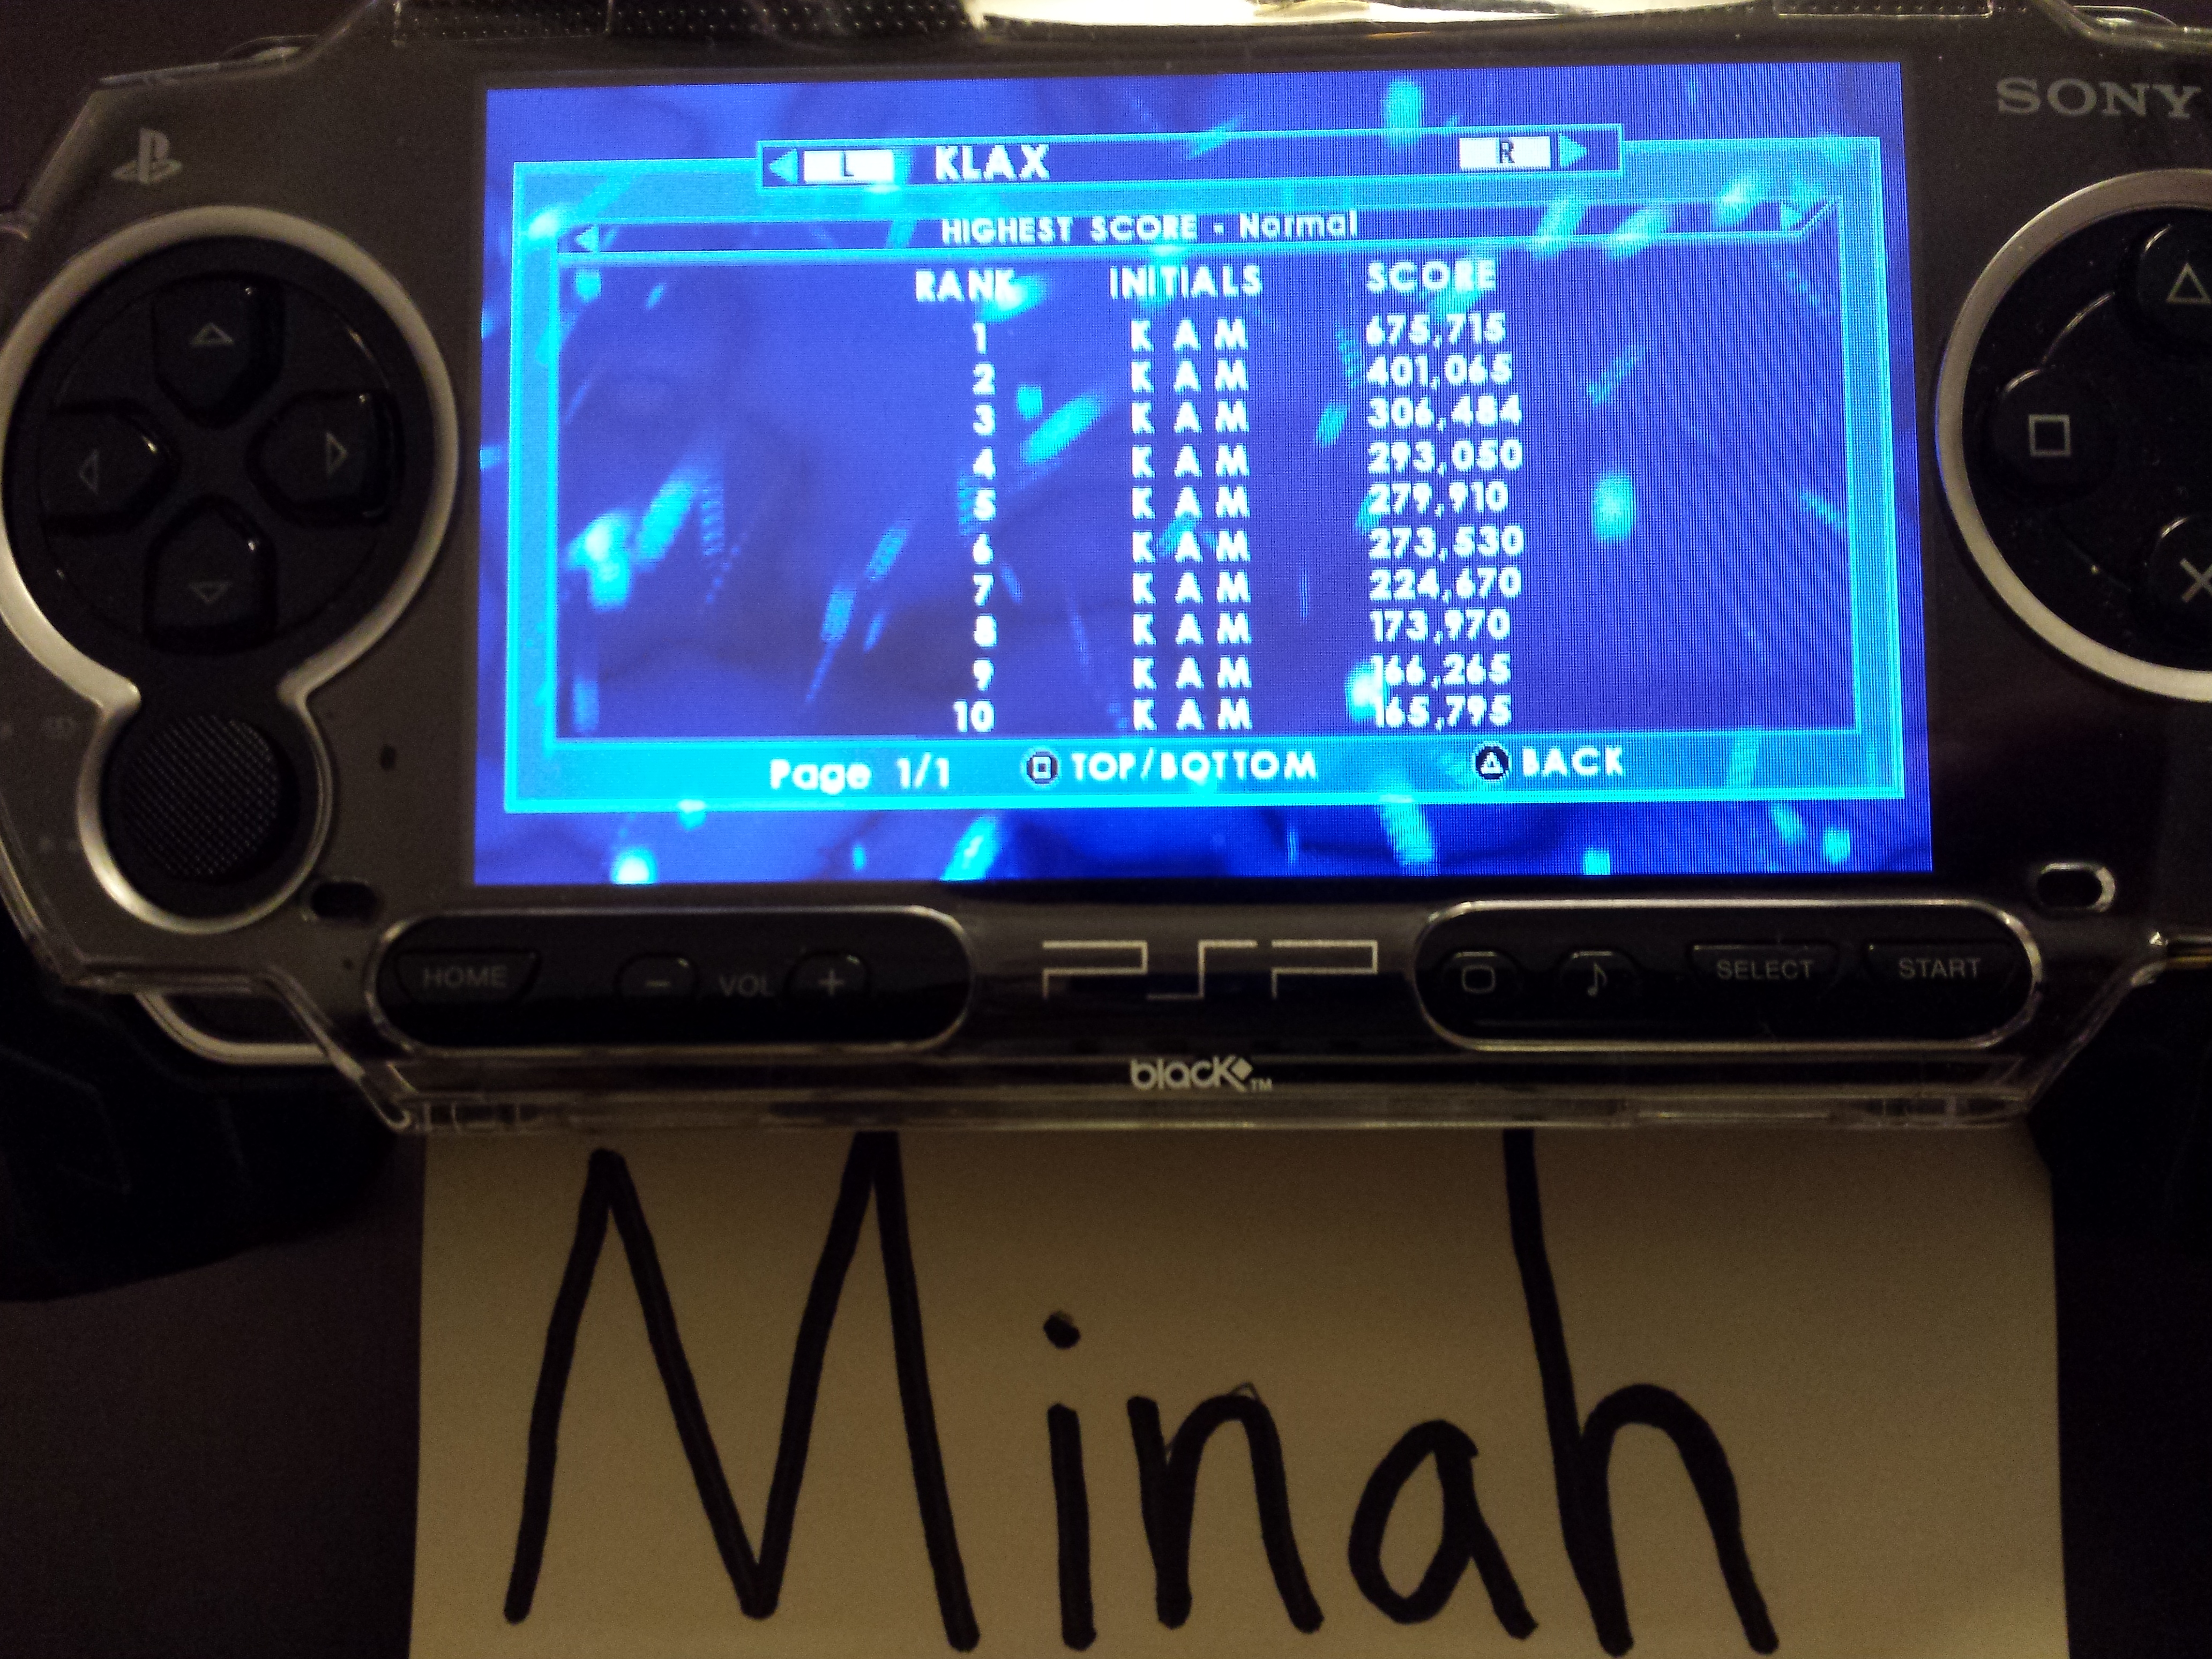 minah: Midway Arcade Treasures: Extended Play: Klax (PSP) 675,715 points on 2014-10-06 19:42:34